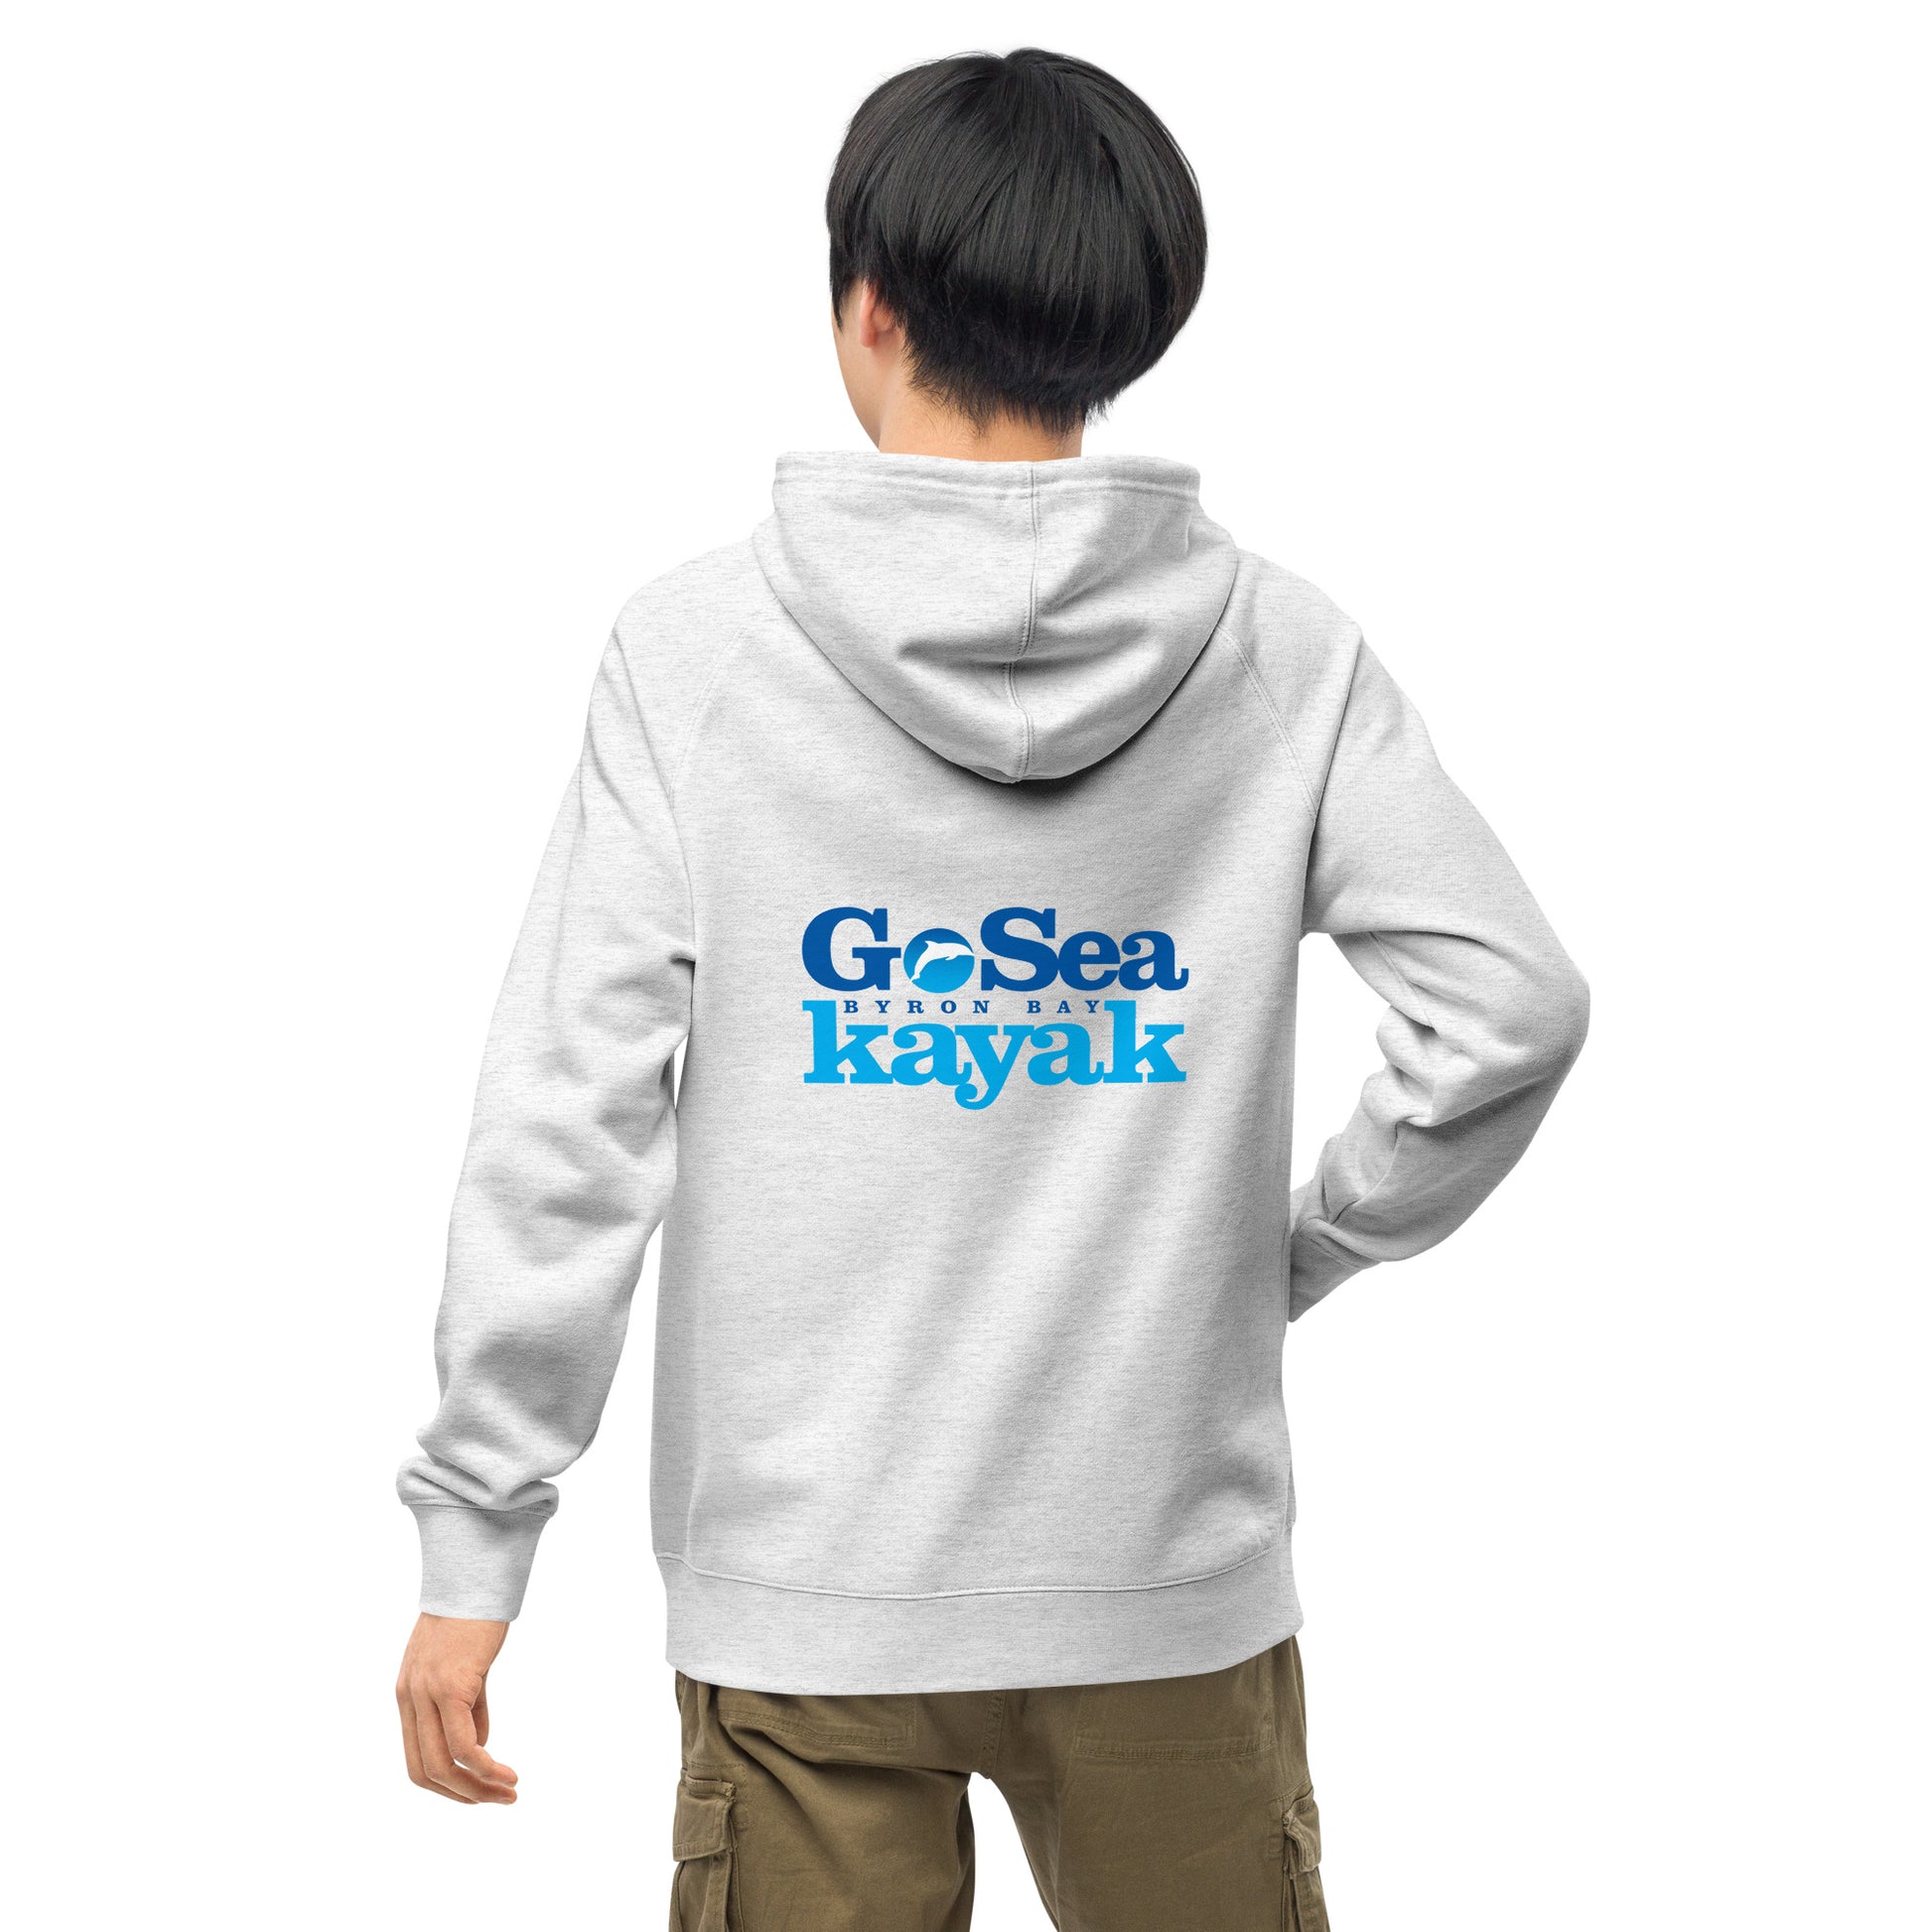  Unisex Hoodie - White Marle / light grey - Back view being warn by man with one hand in pocket - Go Sea Kayak Byron Bay logo on back and front, Kangaroo pocket on front - Genuine Byron Bay Merchandise | Produced by Go Sea Kayak Byron Bay 